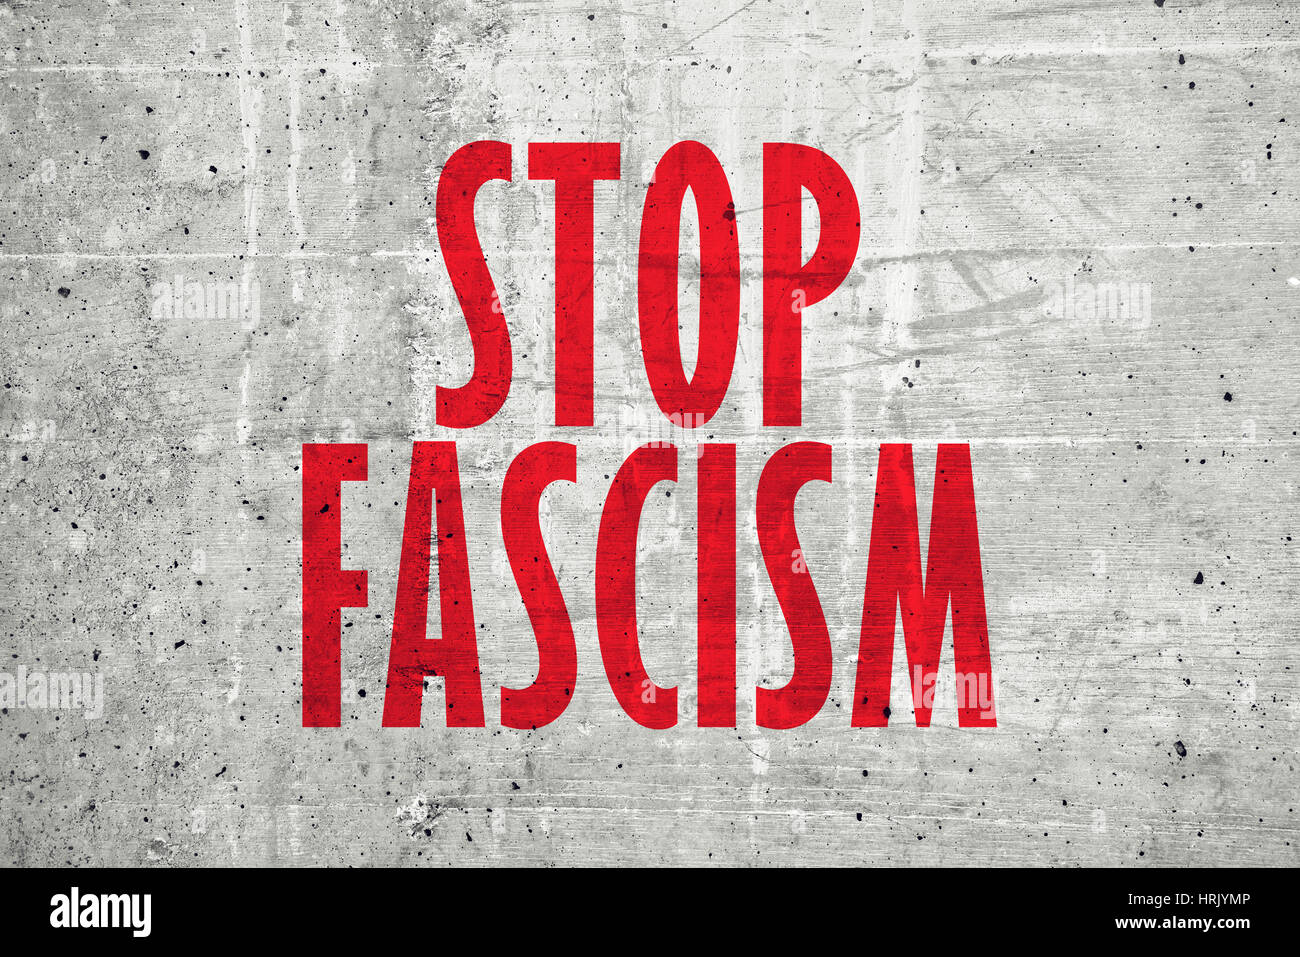 Stop fascism message on concrete wall Stock Photo